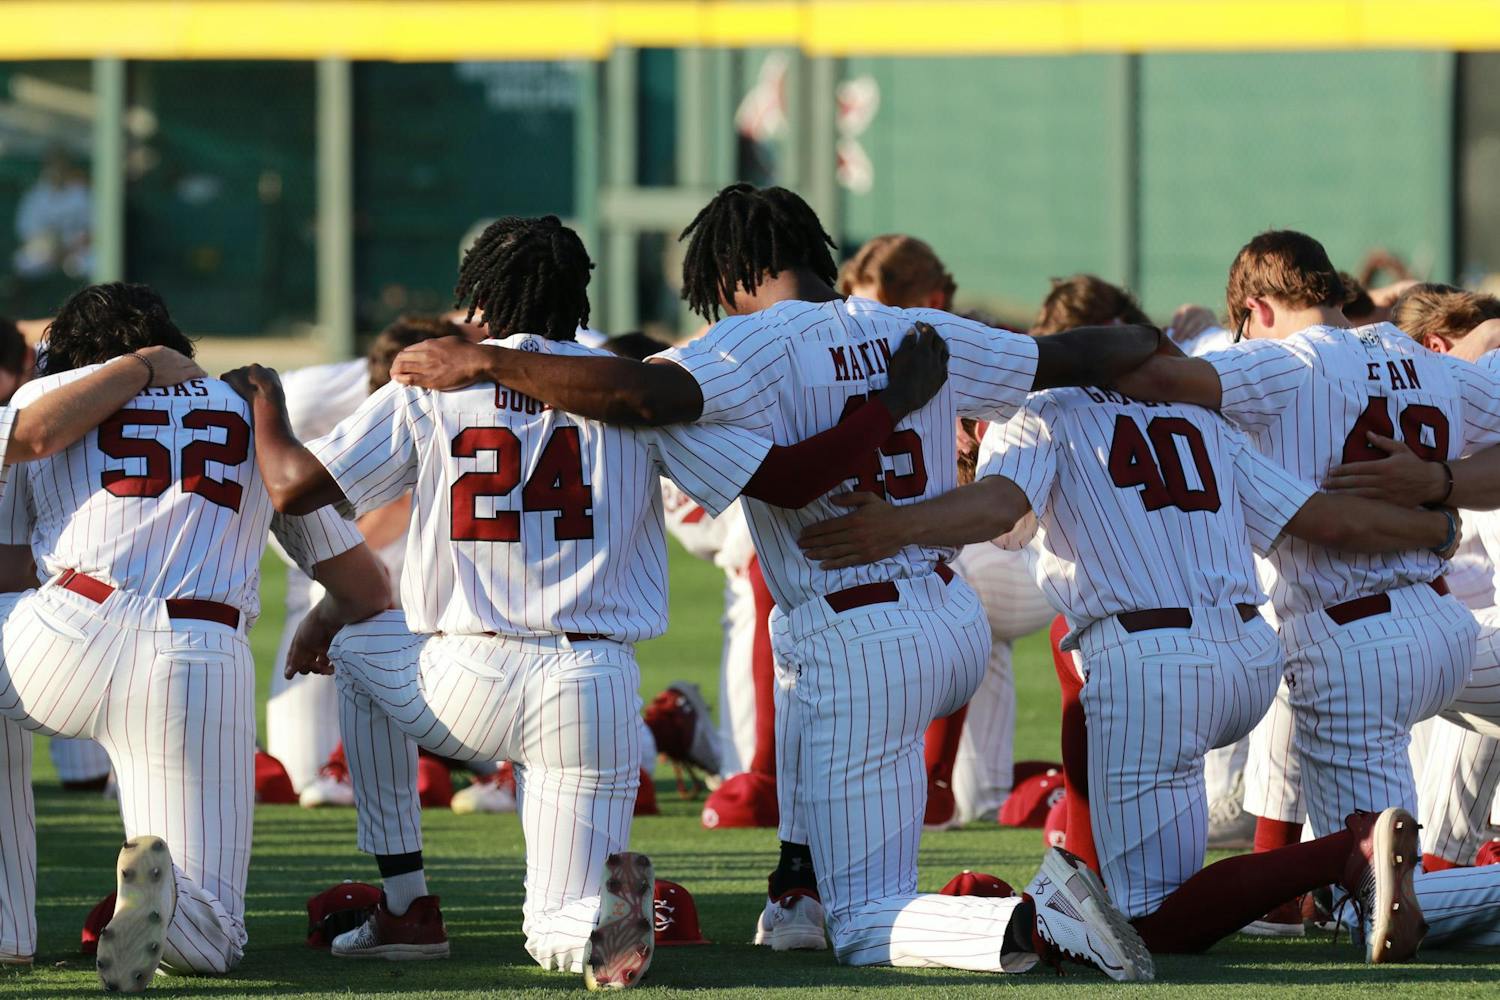 The Gamecocks kneel in a circle and pray as part of their pre-game ritual on April 19, 2024. The No. 20 South Carolina Gamecocks were defeated by the No. 2 Arkansas Razorbacks 2-1 in the first game of the weekend series.